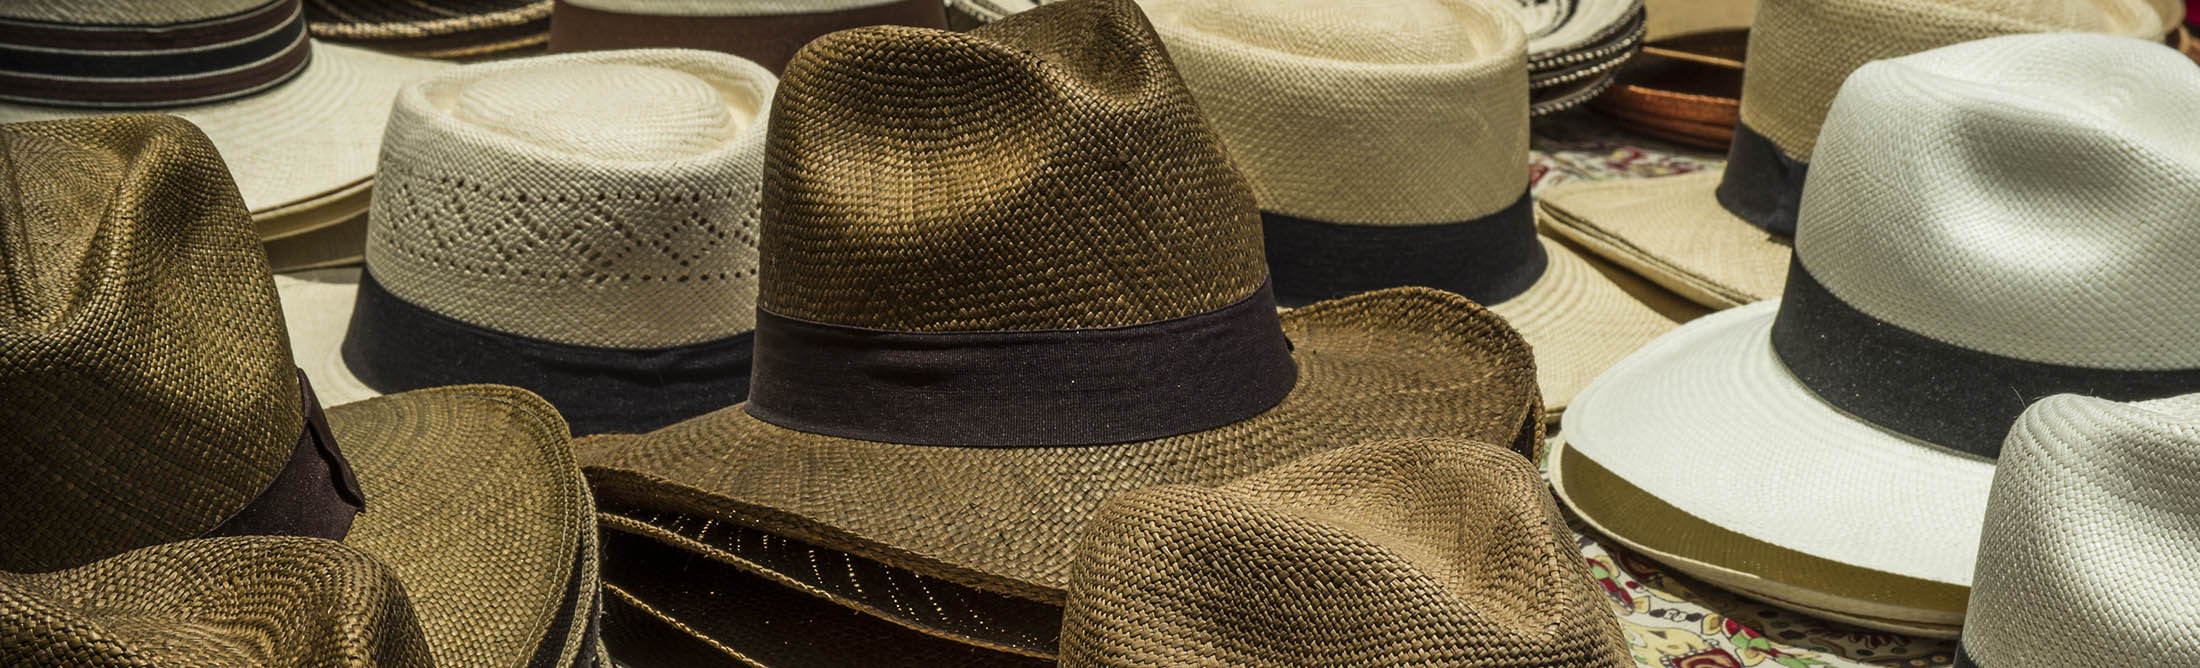 The Perfect Summer Hats for Men - Bloomberg